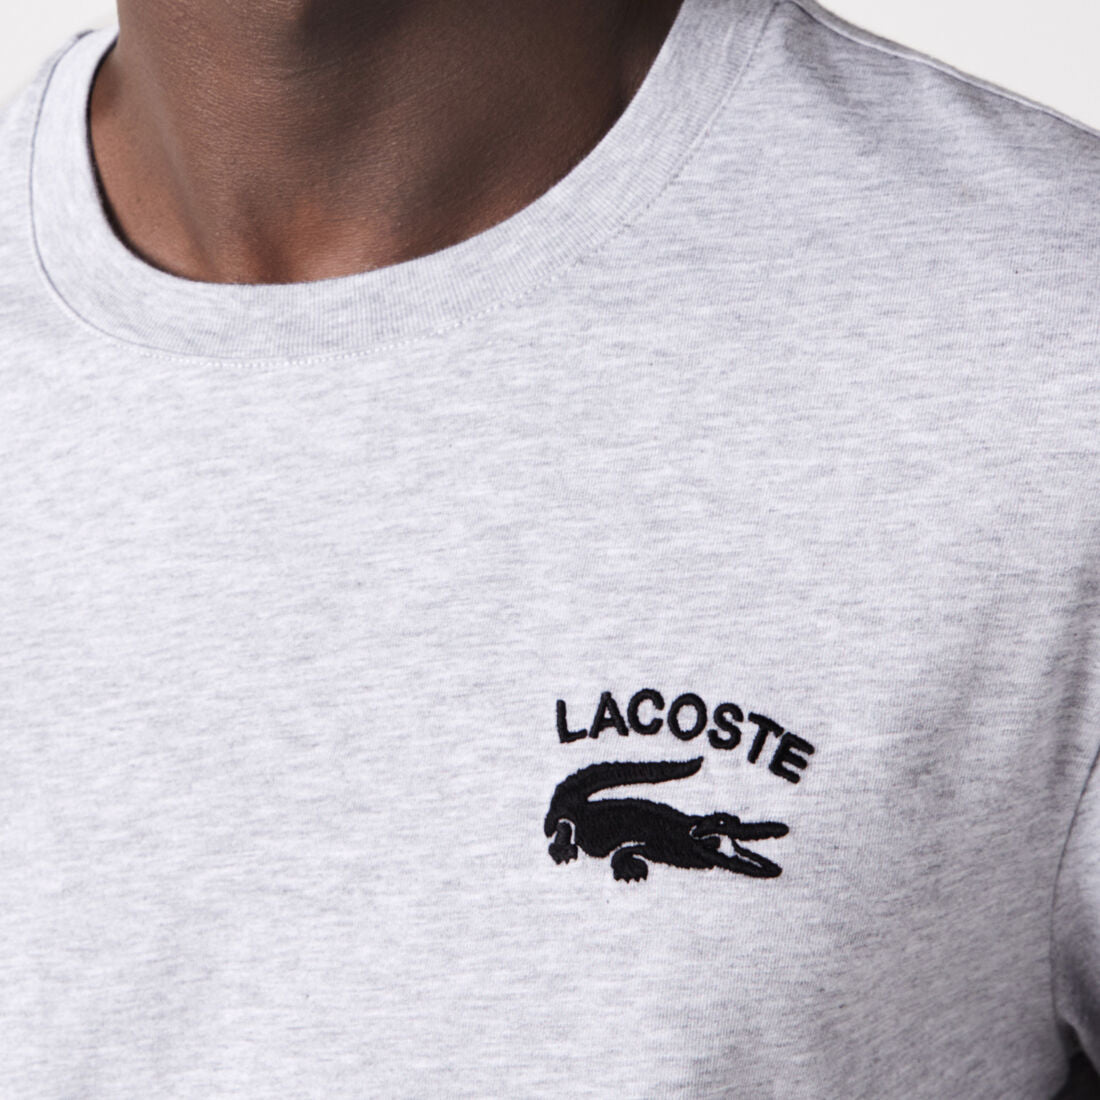 LCA-W15 (Lacoste soft branding t-shirt silver chine) 32294783 LACOSTE